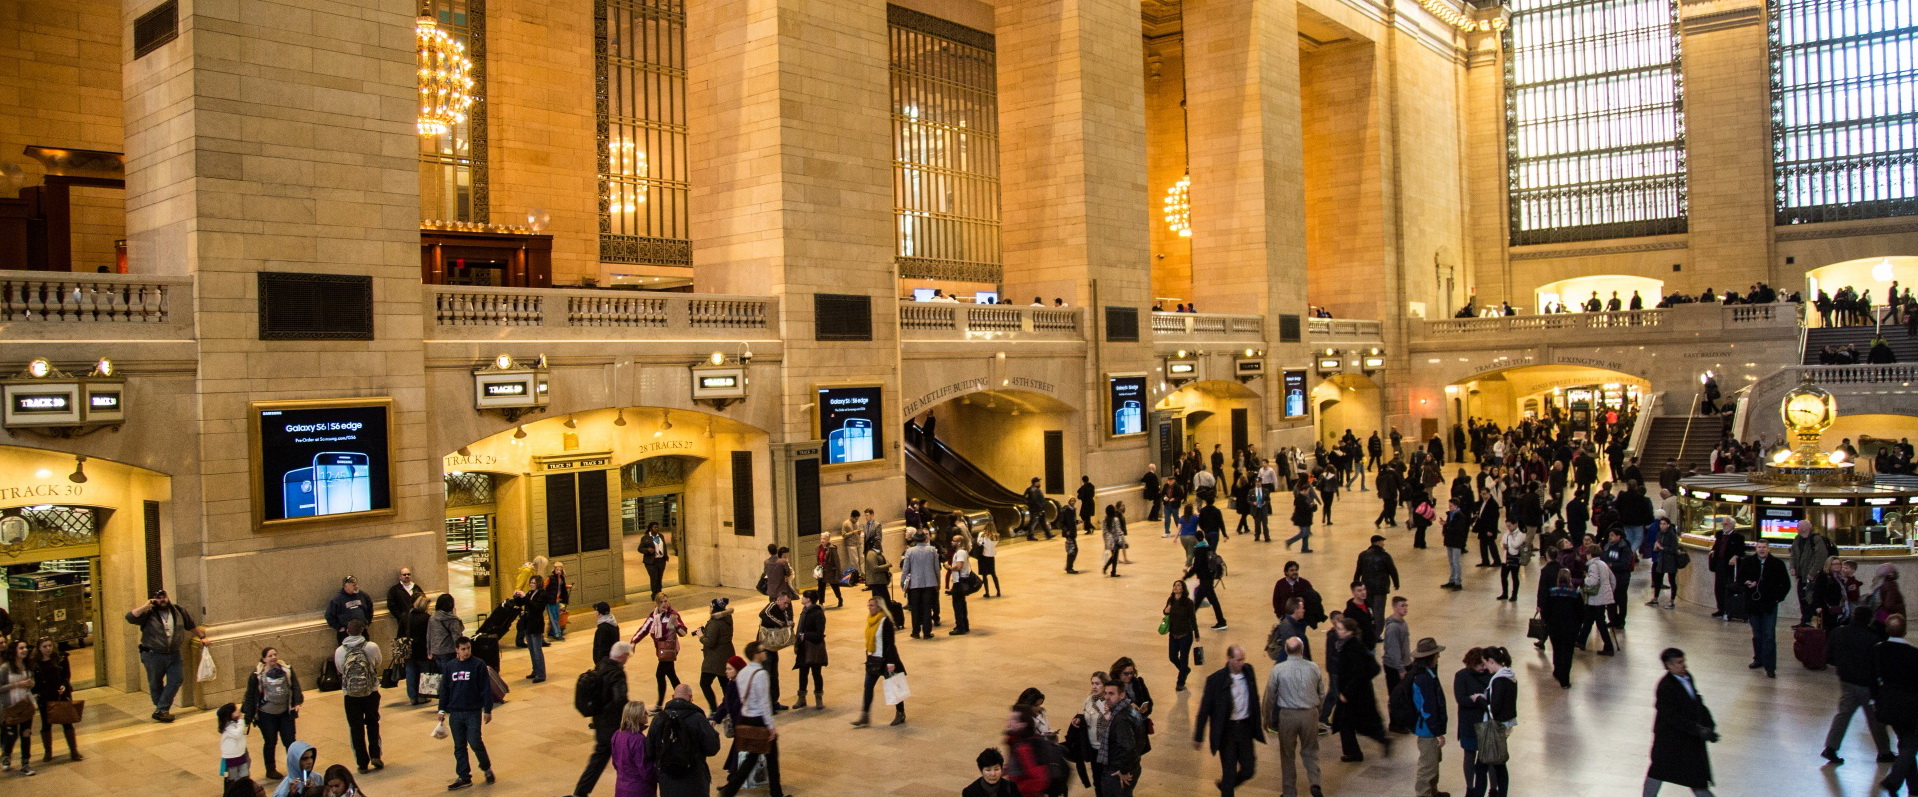 grand-central-station-in-new-york-14676504698CK